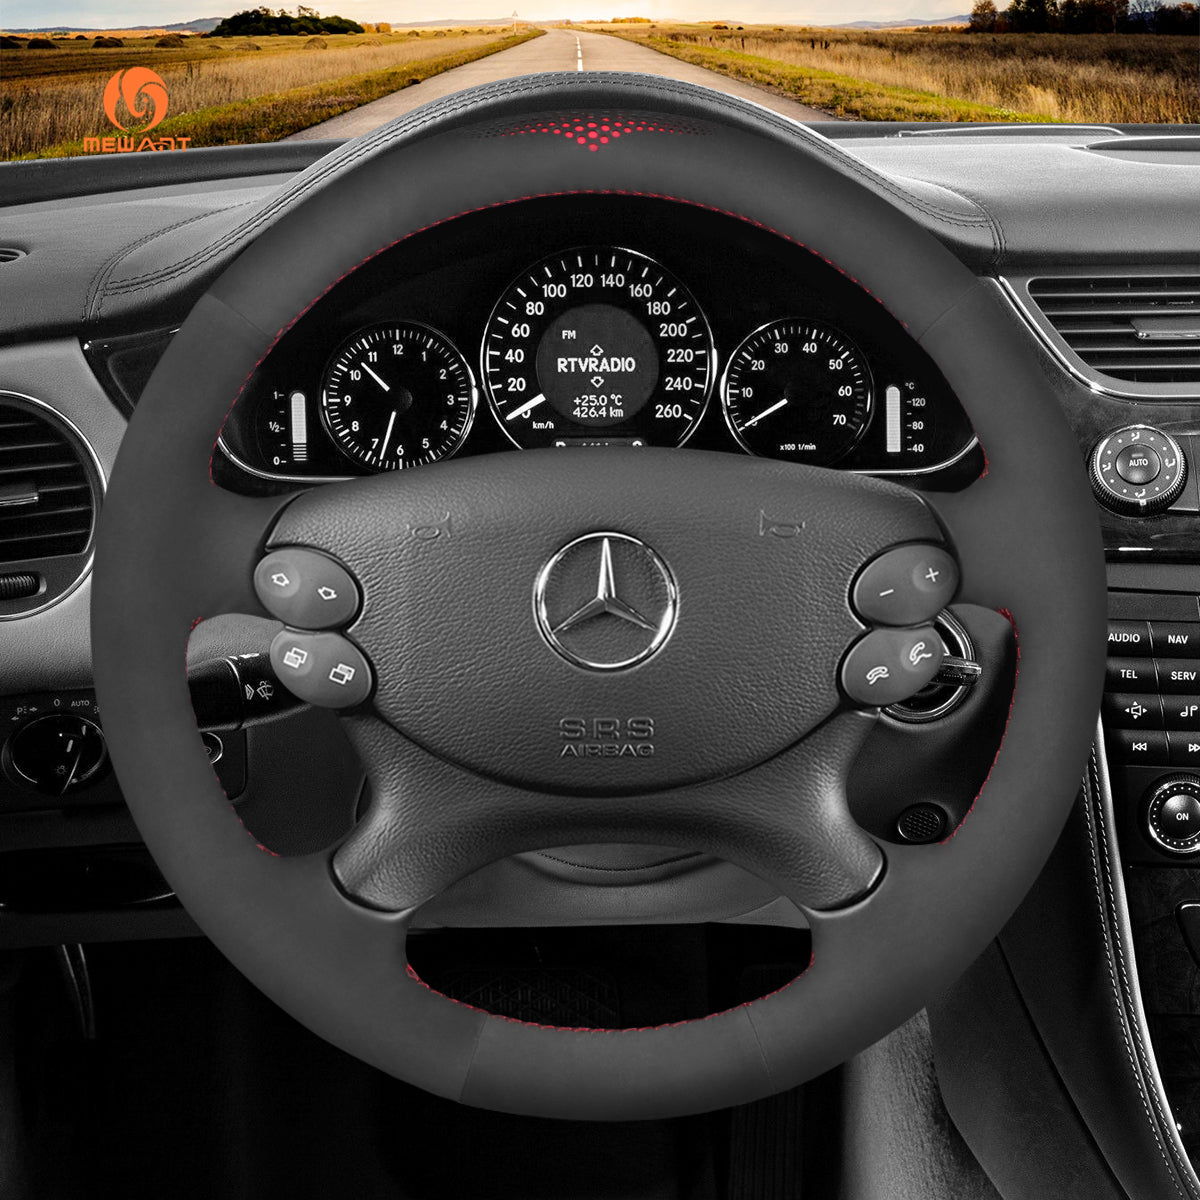 MEWANT Black Leather Suede Car Steering Wheel Cover for Mercedes Benz W211 C209 C219 W463 R230